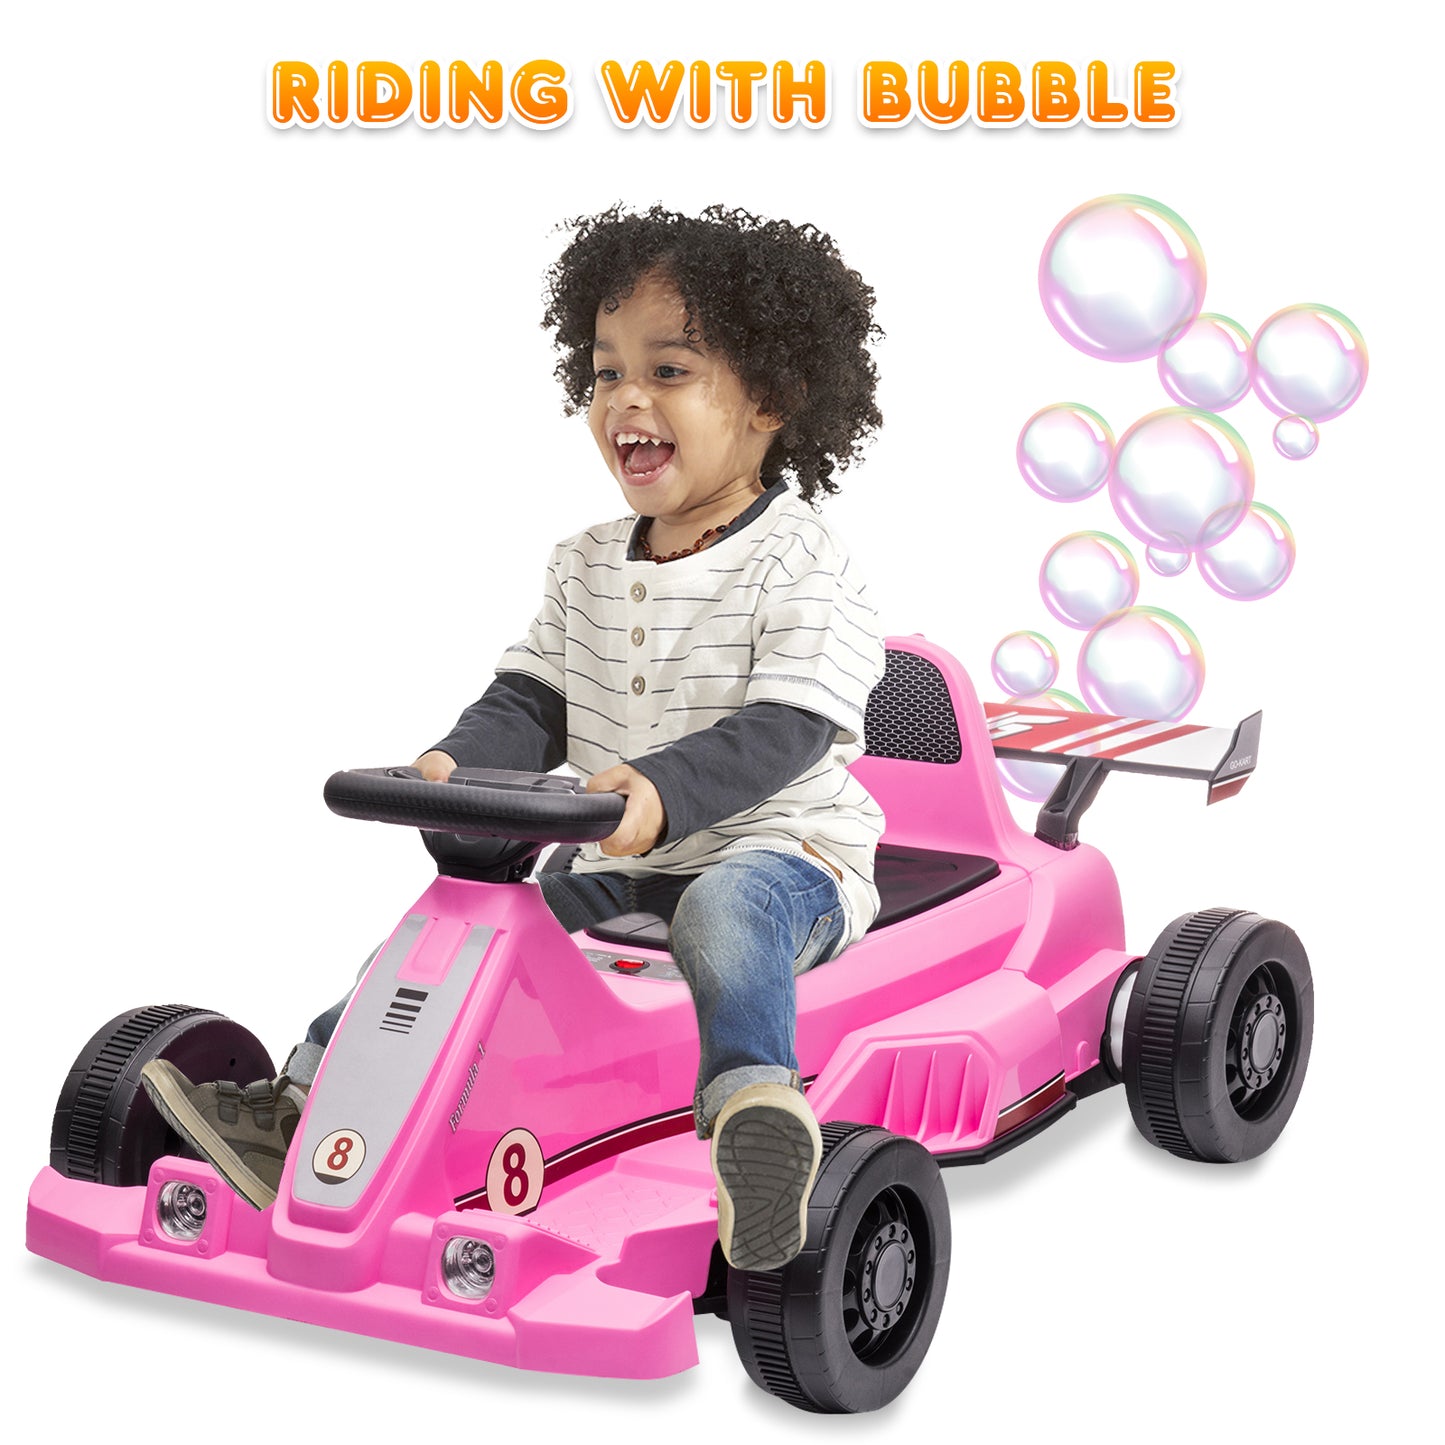 SYNGAR 6V Kids Bubble Ride on Car, Battery Powered Go Kart with Bubble Function LED Headlights and Horn, Kids Ride on Toys for Boys Girls Ages 2 and Older, Pink